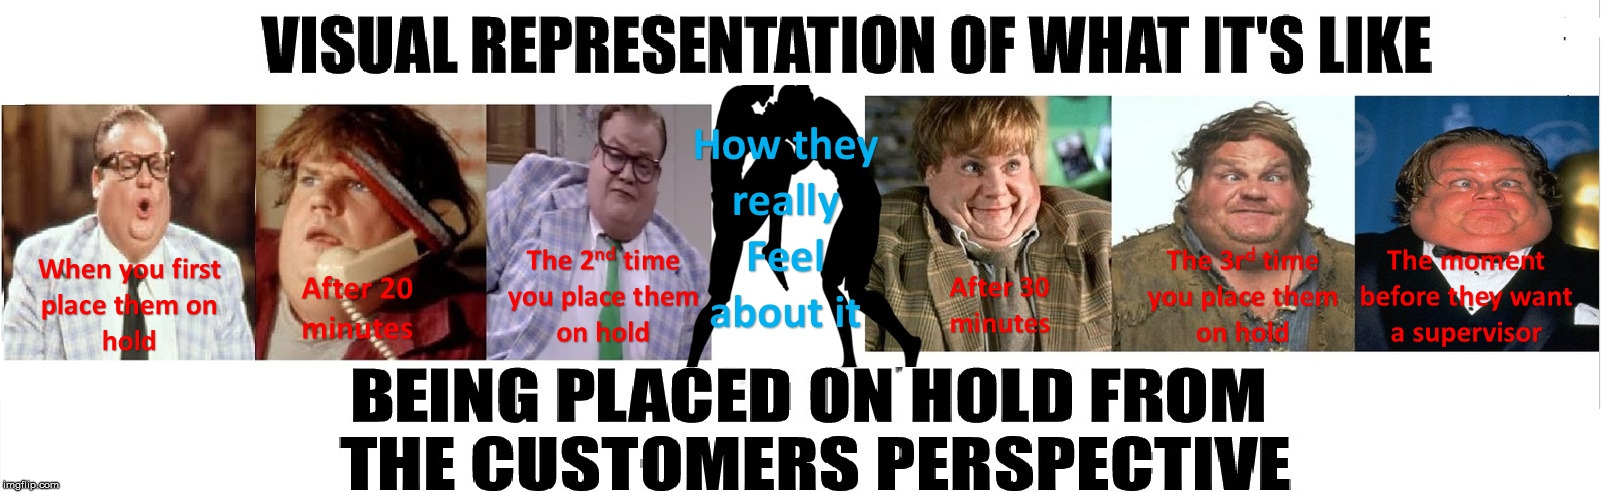 Customers On Hold | image tagged in placing you on hold,customer service,customers on hold,hold music,being placed on hold,placing customers on hold | made w/ Imgflip meme maker